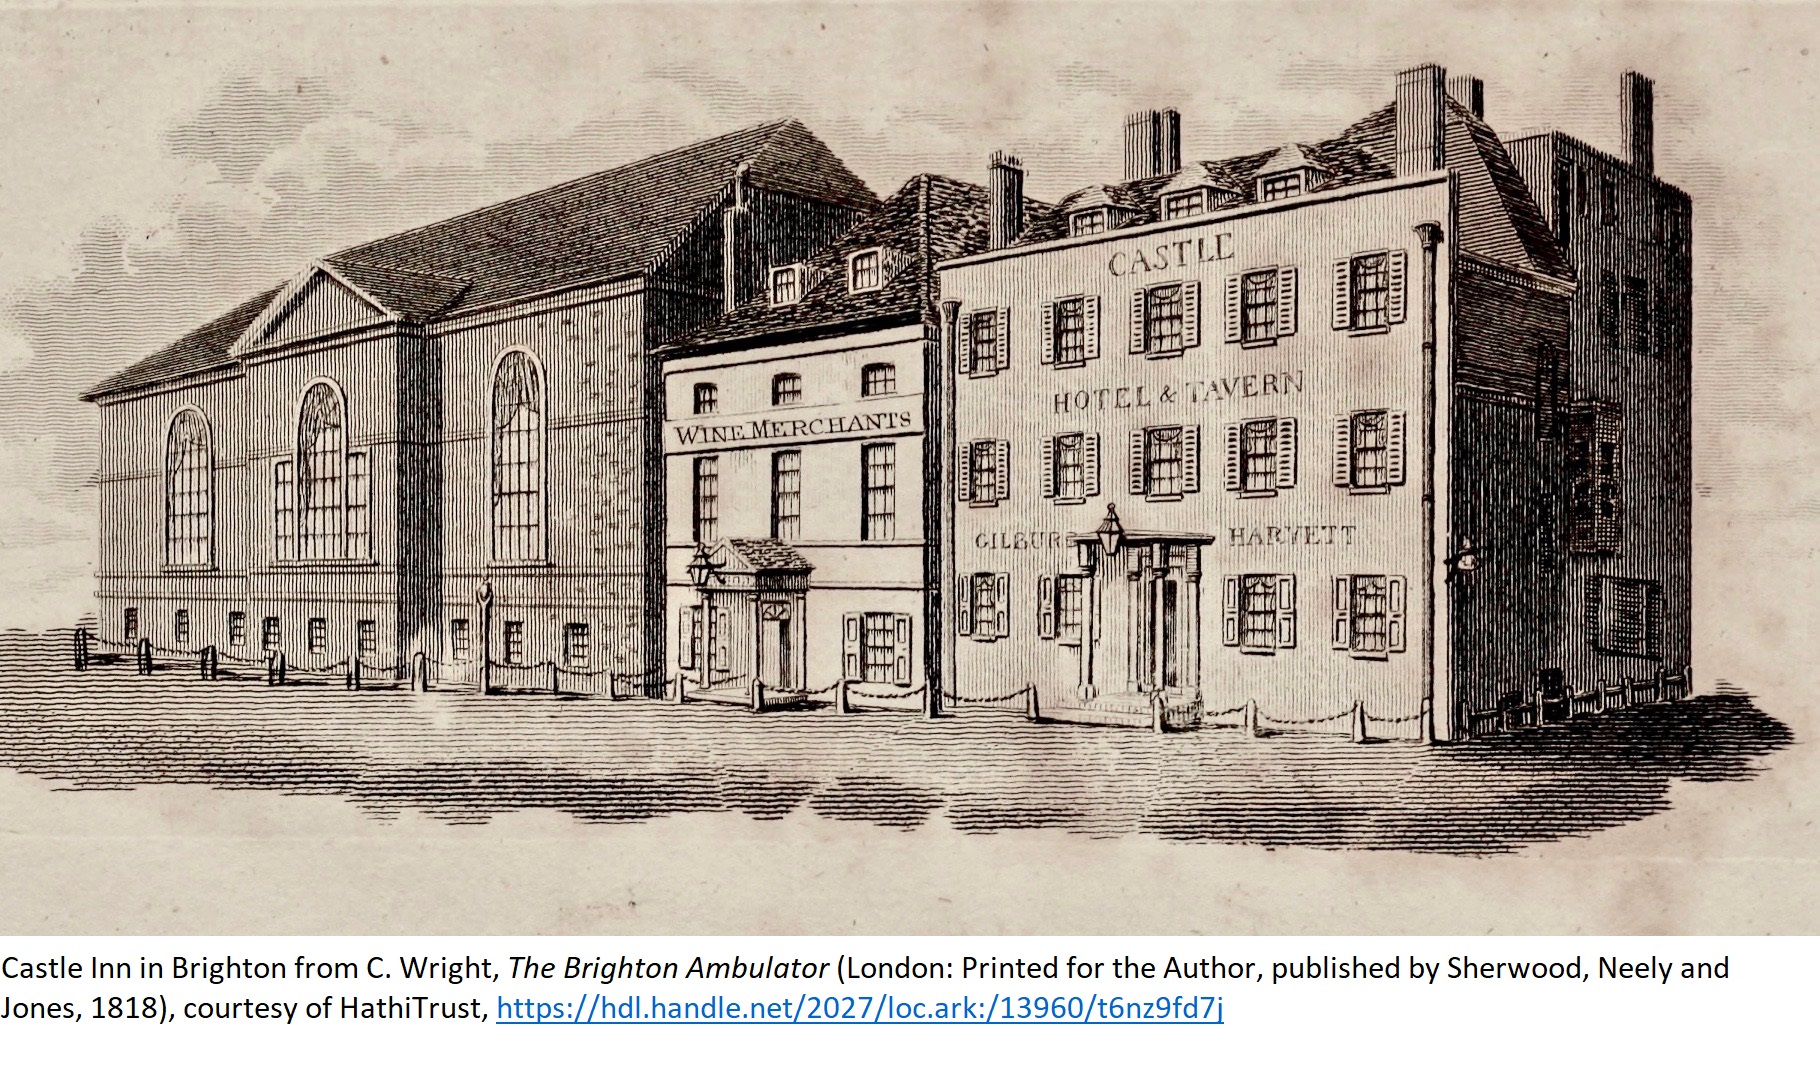  Castle Inn in Brighton from C. Wright, The Brighton Ambulator (London: Printed for the Author, published by Sherwood, Neely and Jones, 1818), courtesy of HathiTrust, https://hdl.handle.net/2027/loc.ark:/13960/t6nz9fd7j